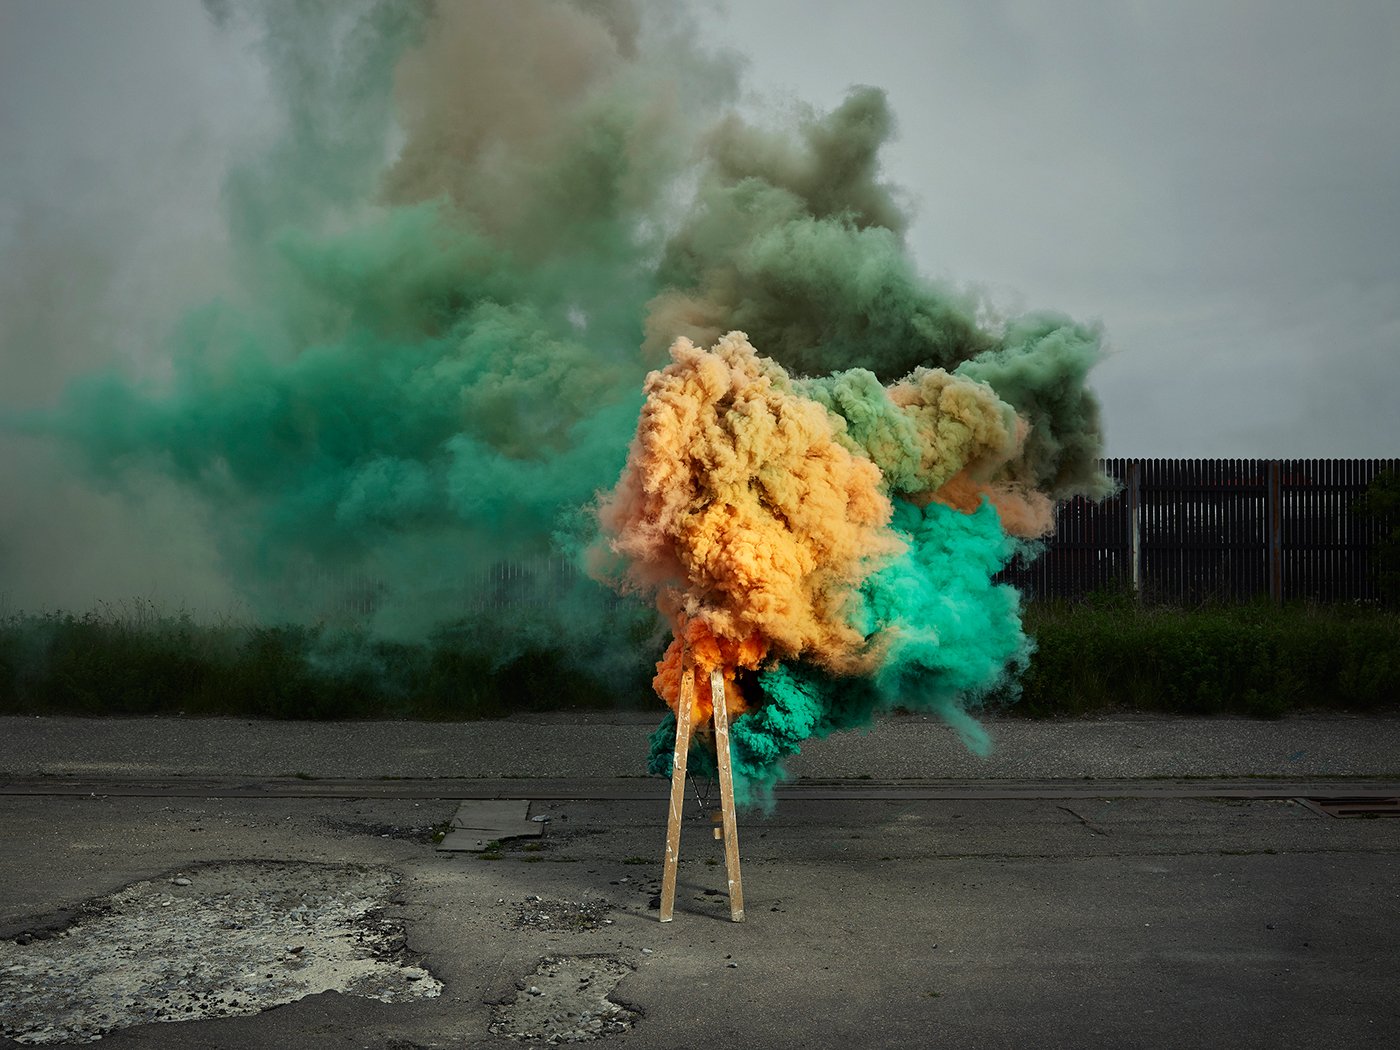 Ken Hermann's Smoke is an Eye-Catching Explosion of Color